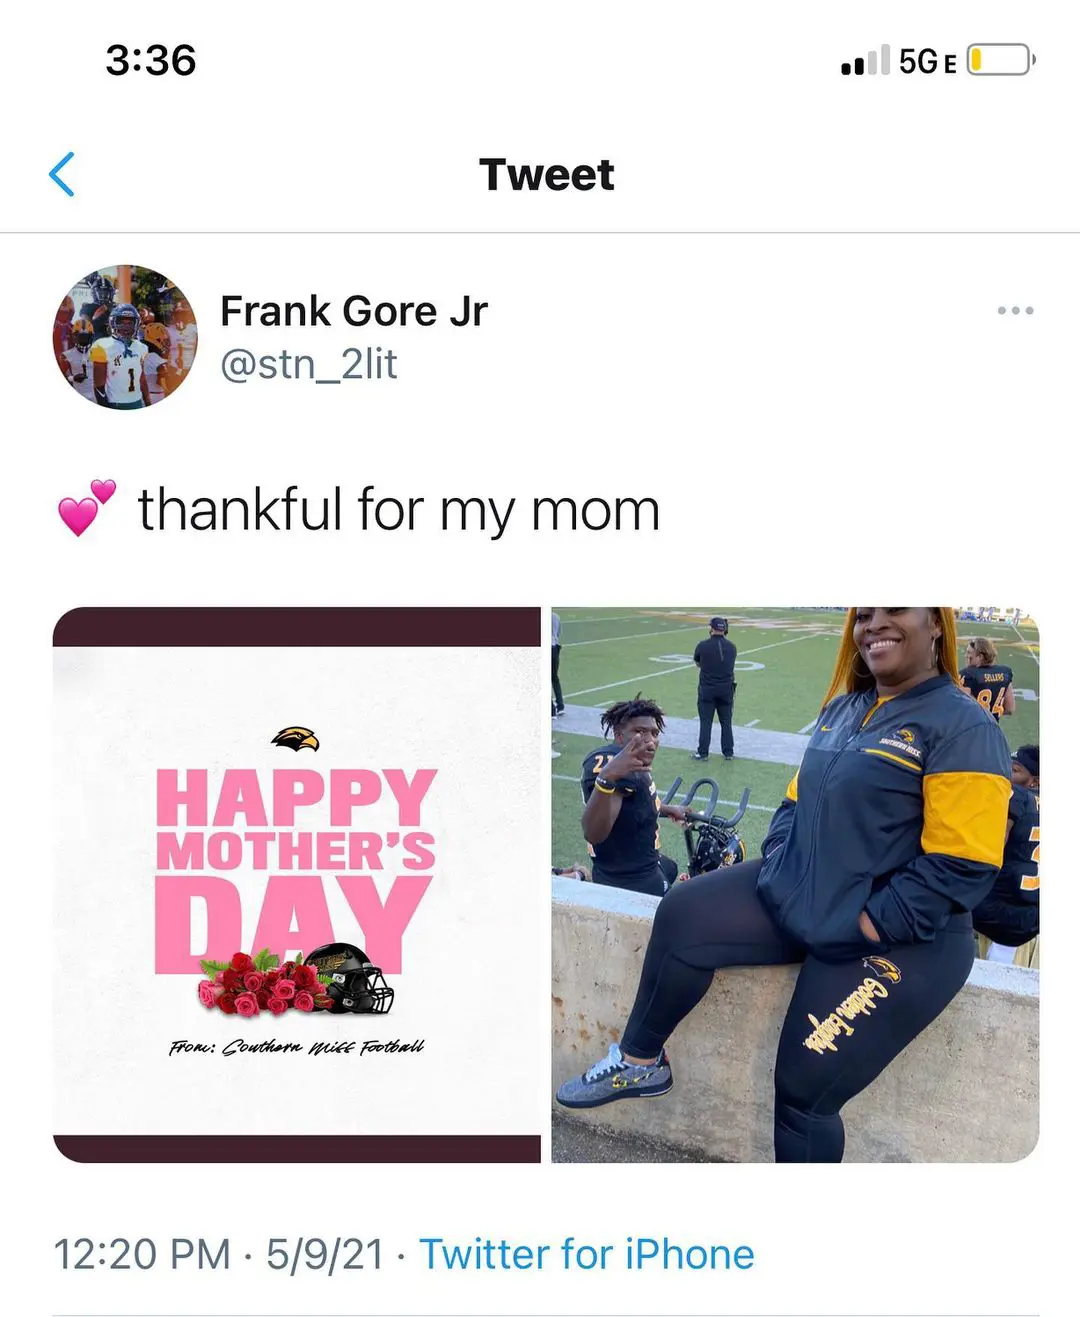 Frank Gore Jr posts a sweet message for his mother on the occasion of mother's day in 2021